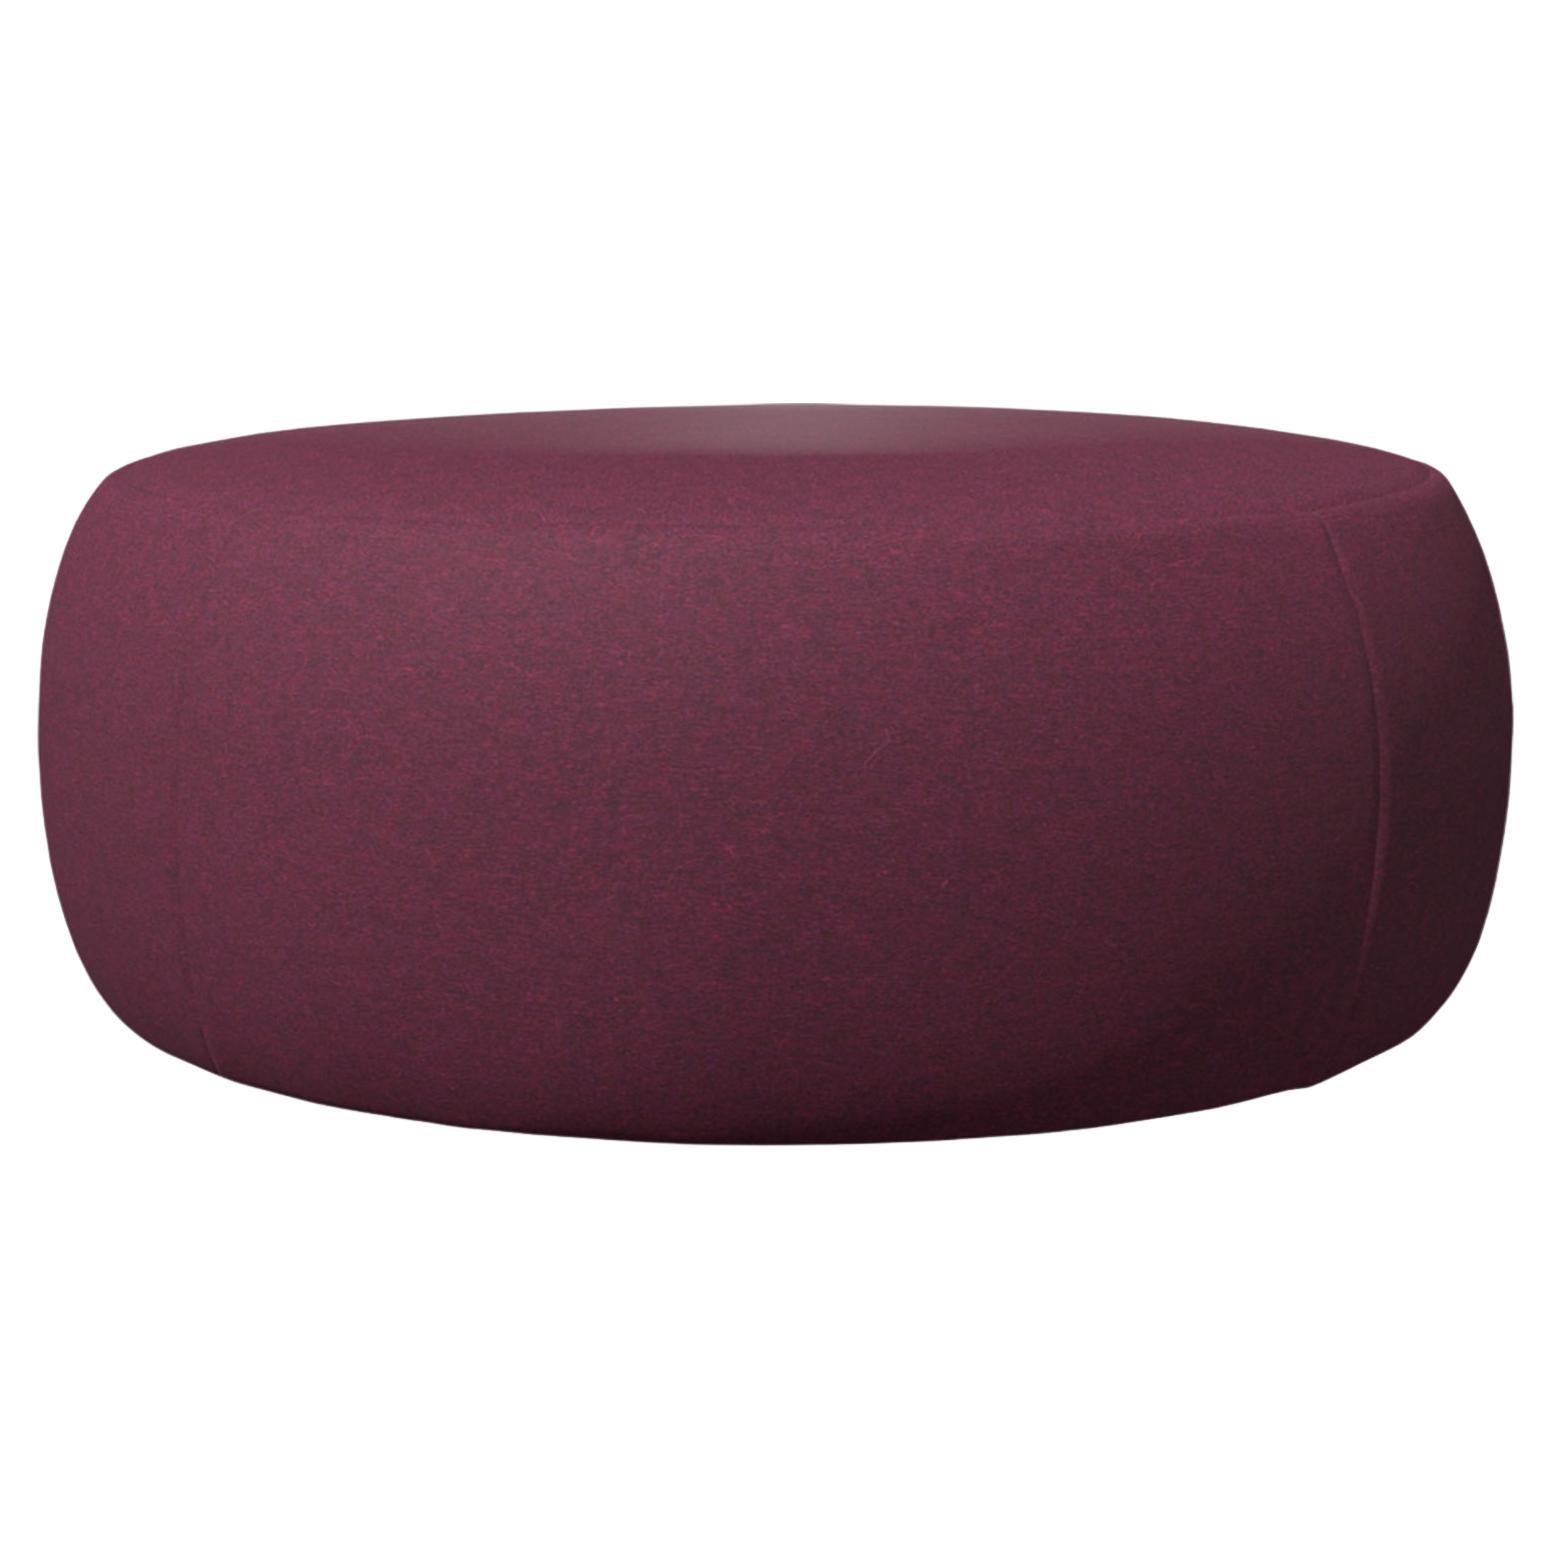 Moooi Pooof Large Pouf in Divina MD, 683 Purple Upholstery